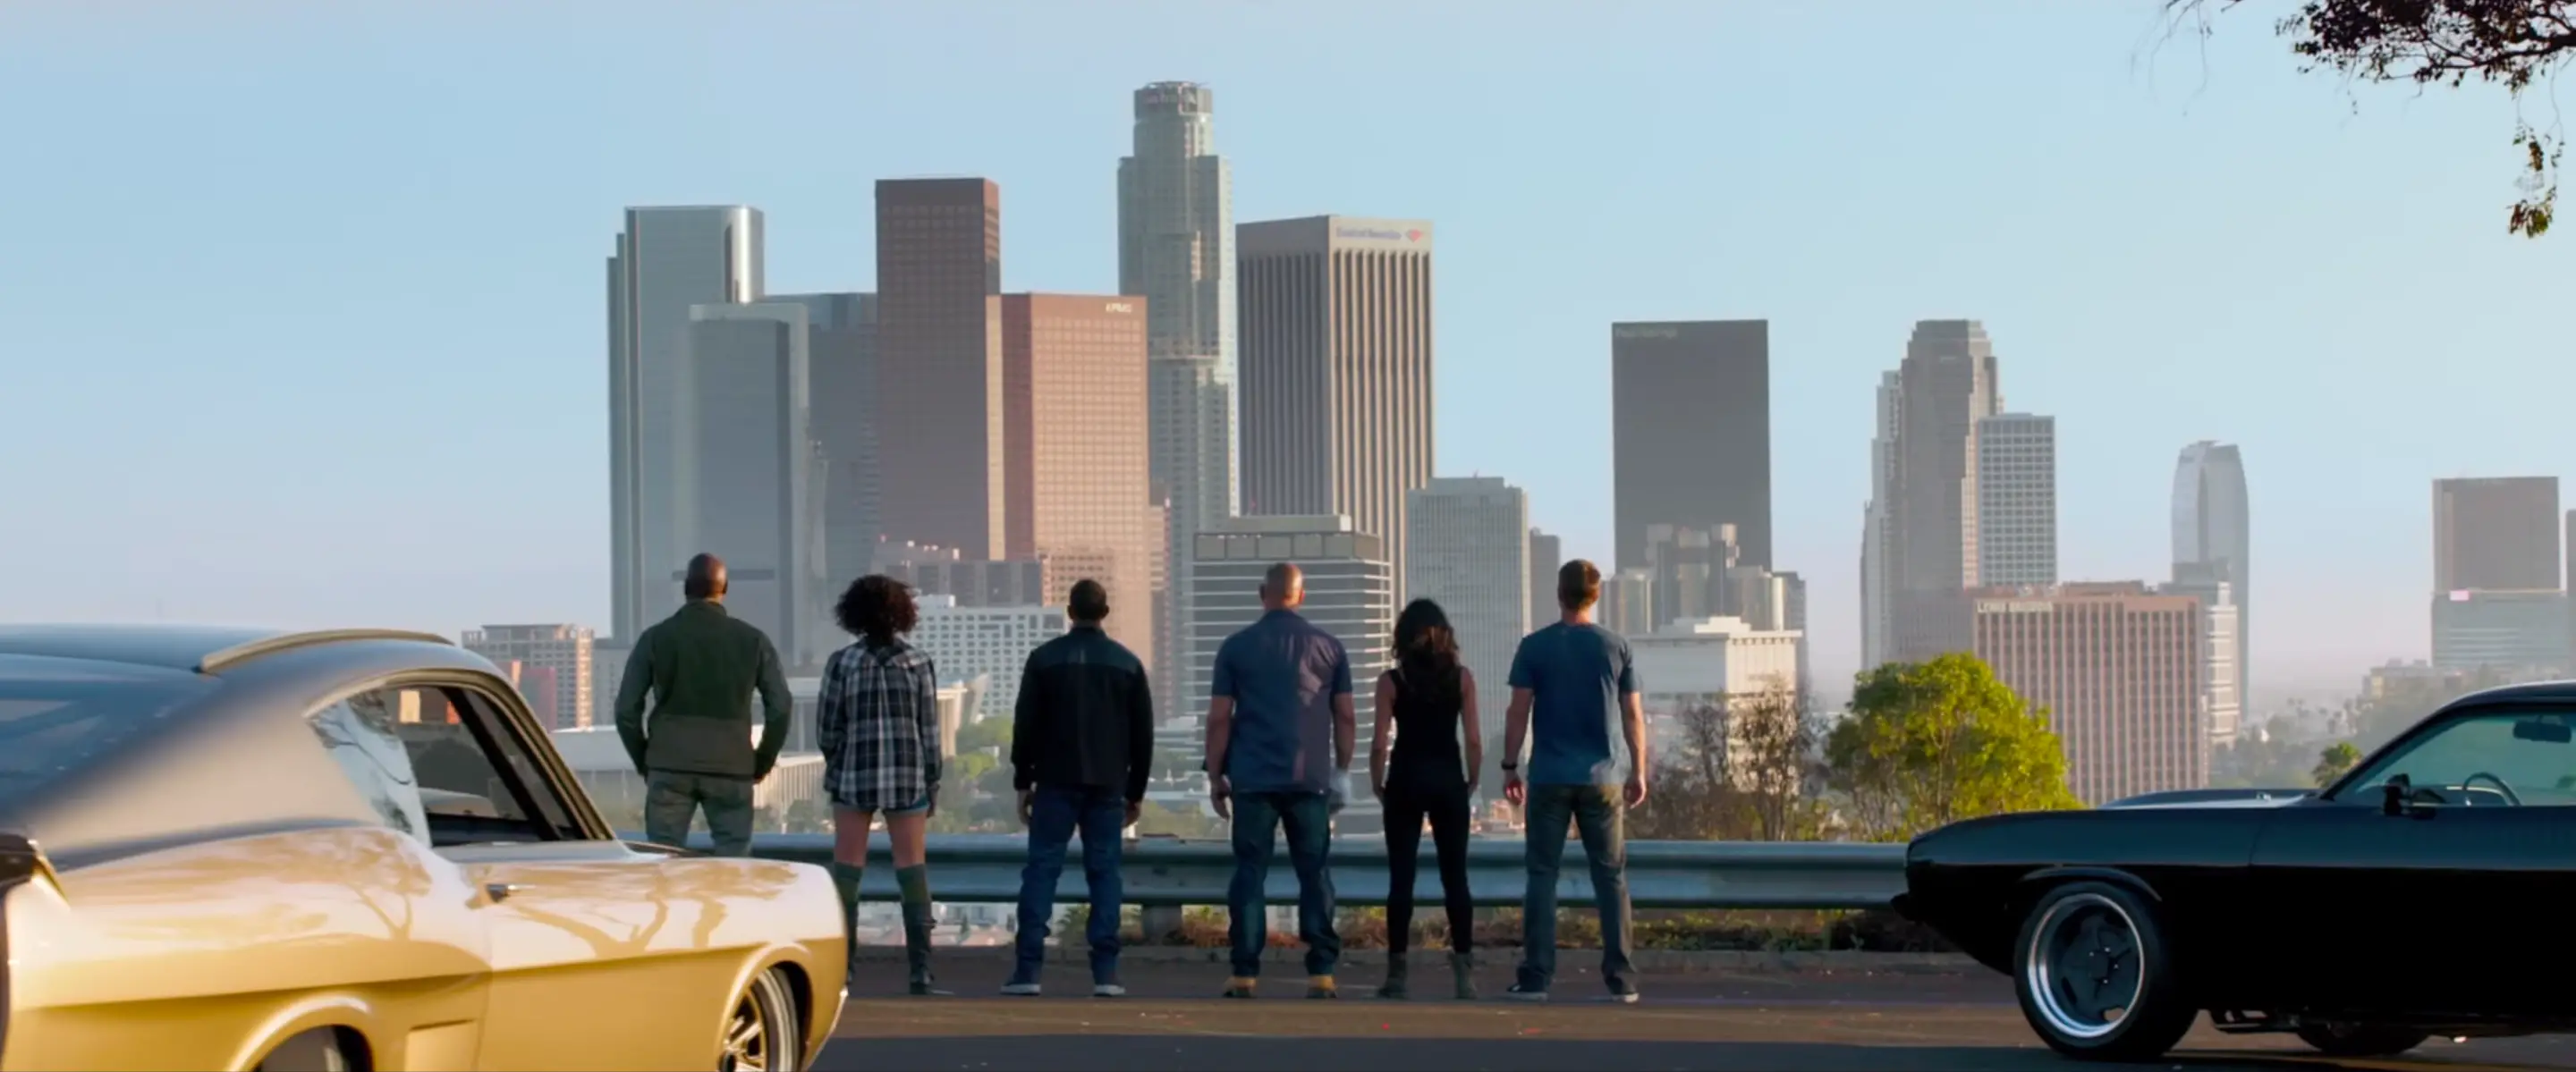 Furious 7 (Fast & Furious 7) 2015 – Movie HD Wallpapers